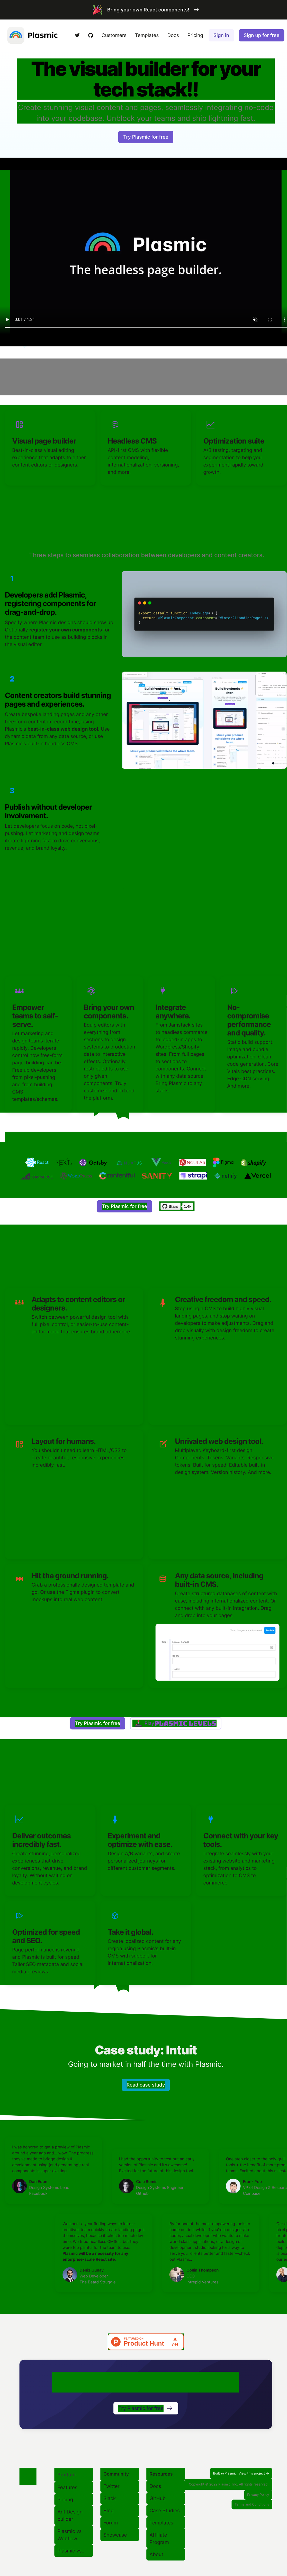 Screenshot of Plasmic website, with saturated parts shown as green